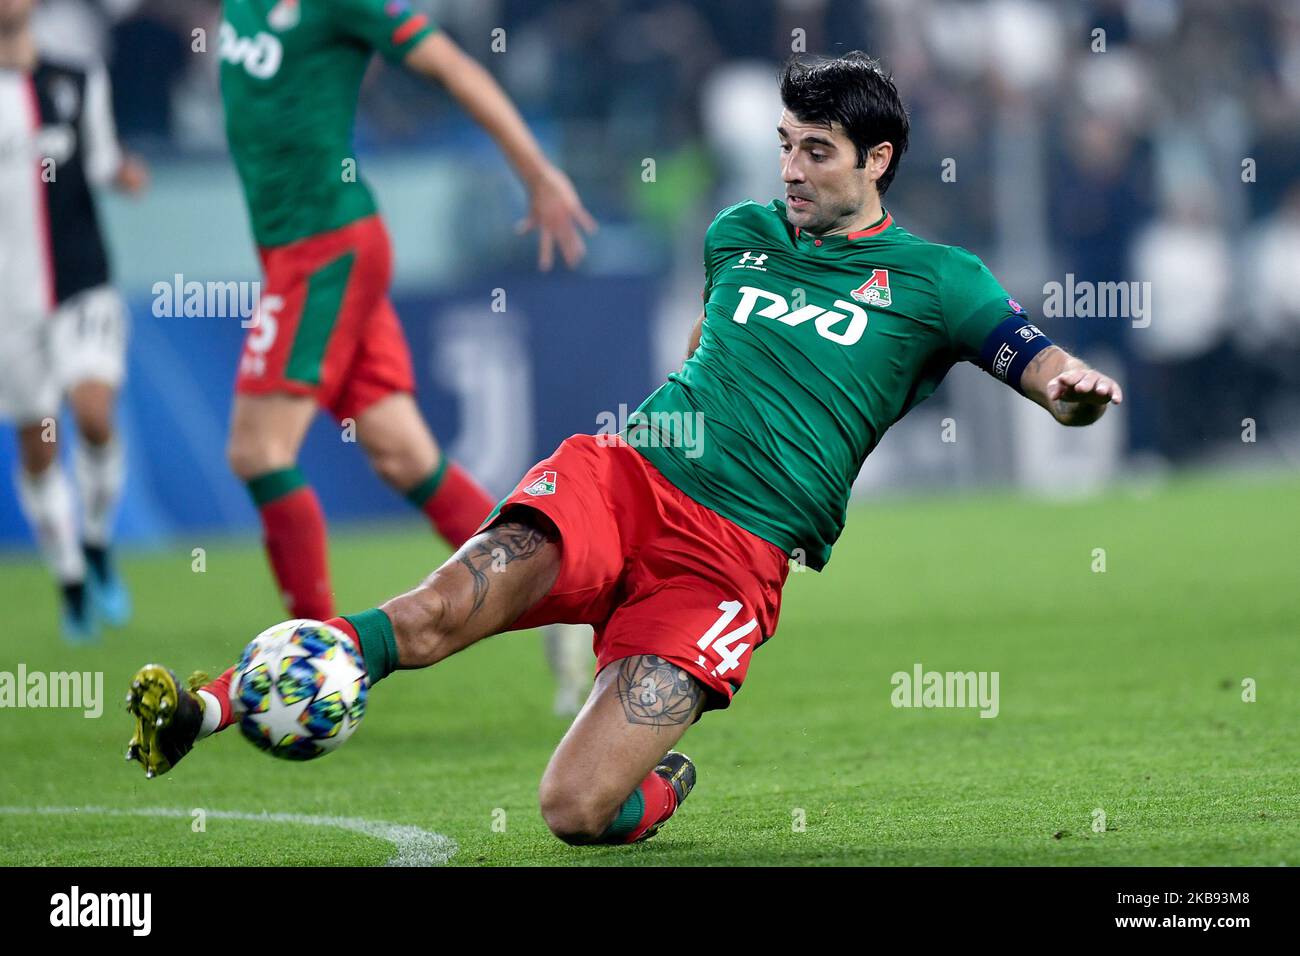 Vedran Corluka of Lokomotiv Moscow during the UEFA Champions League group stage match between Juventus and Lokomotiv Moscow at the Juventus Stadium, Turin, Italy on 22 October 2019. (Photo by Giuseppe Maffia/NurPhoto) Stock Photo